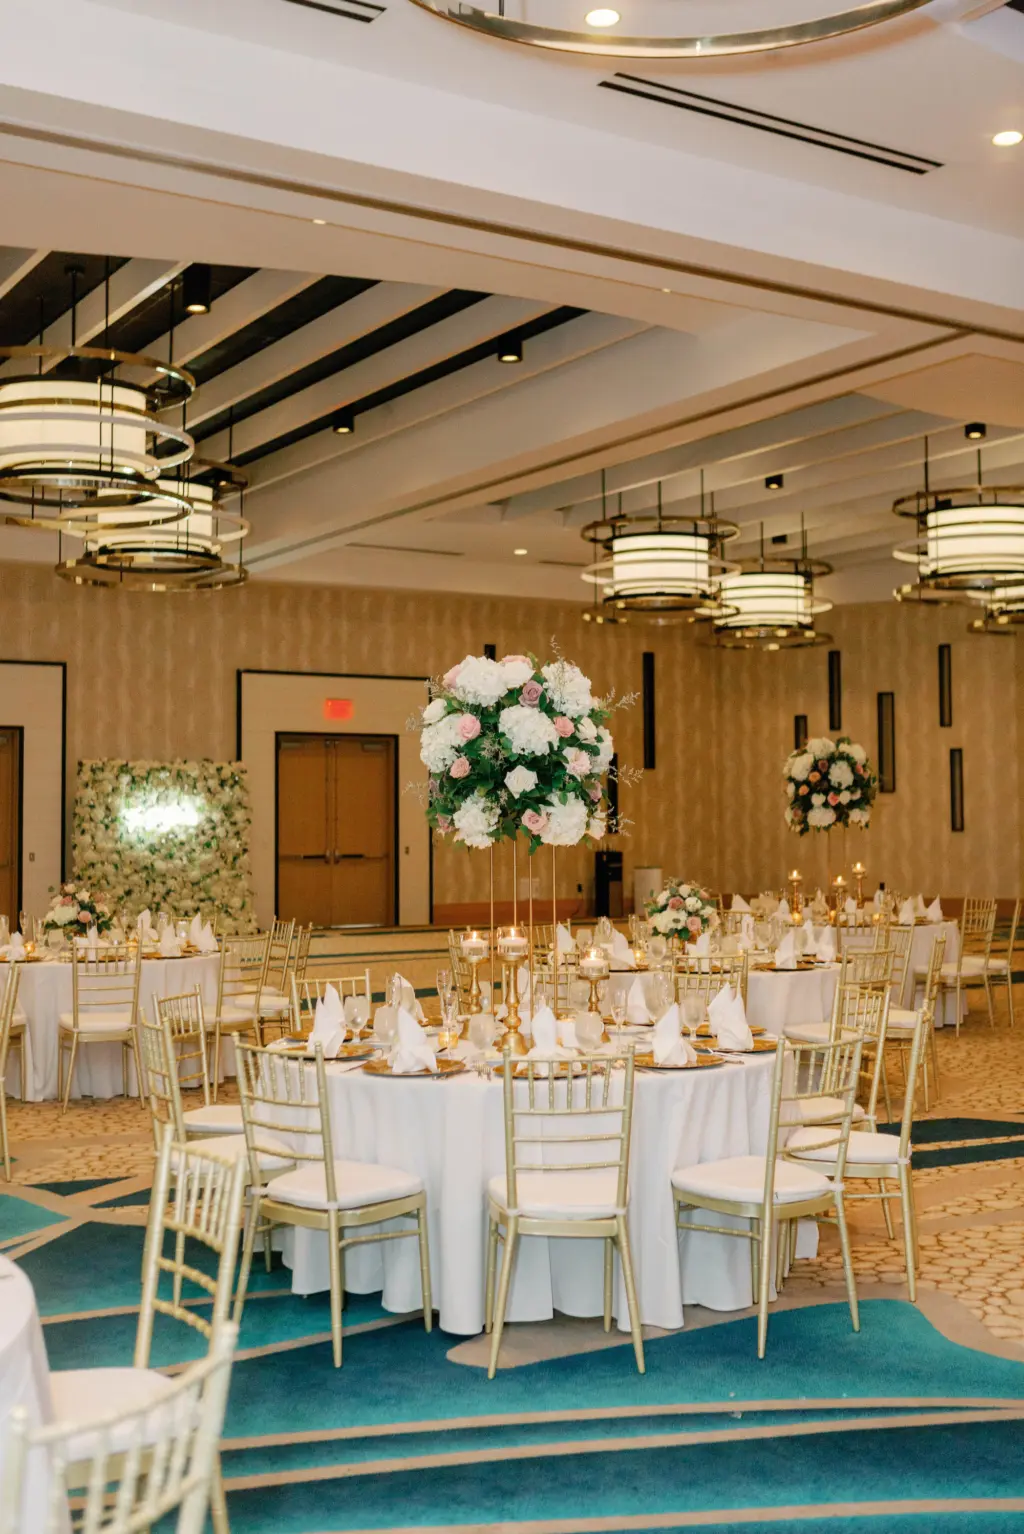 Gold Elegant Wedding Reception with Gold Chiavari Chairs, Tall White and Pink Centerpiece Ballroom Inspiration | Venue Wyndham Grand Clearwater Wedding